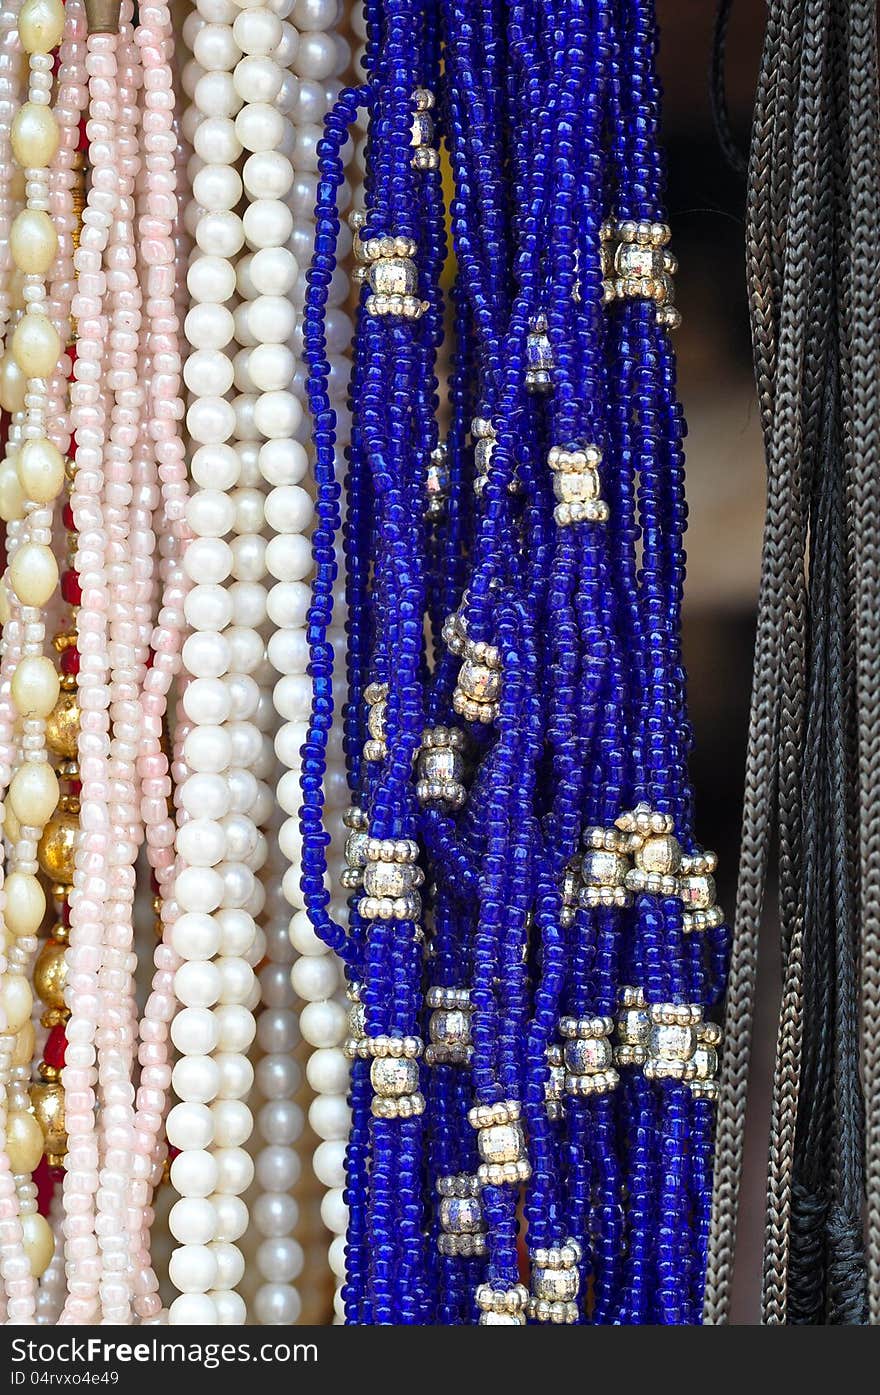 Indian beads on the market, south India